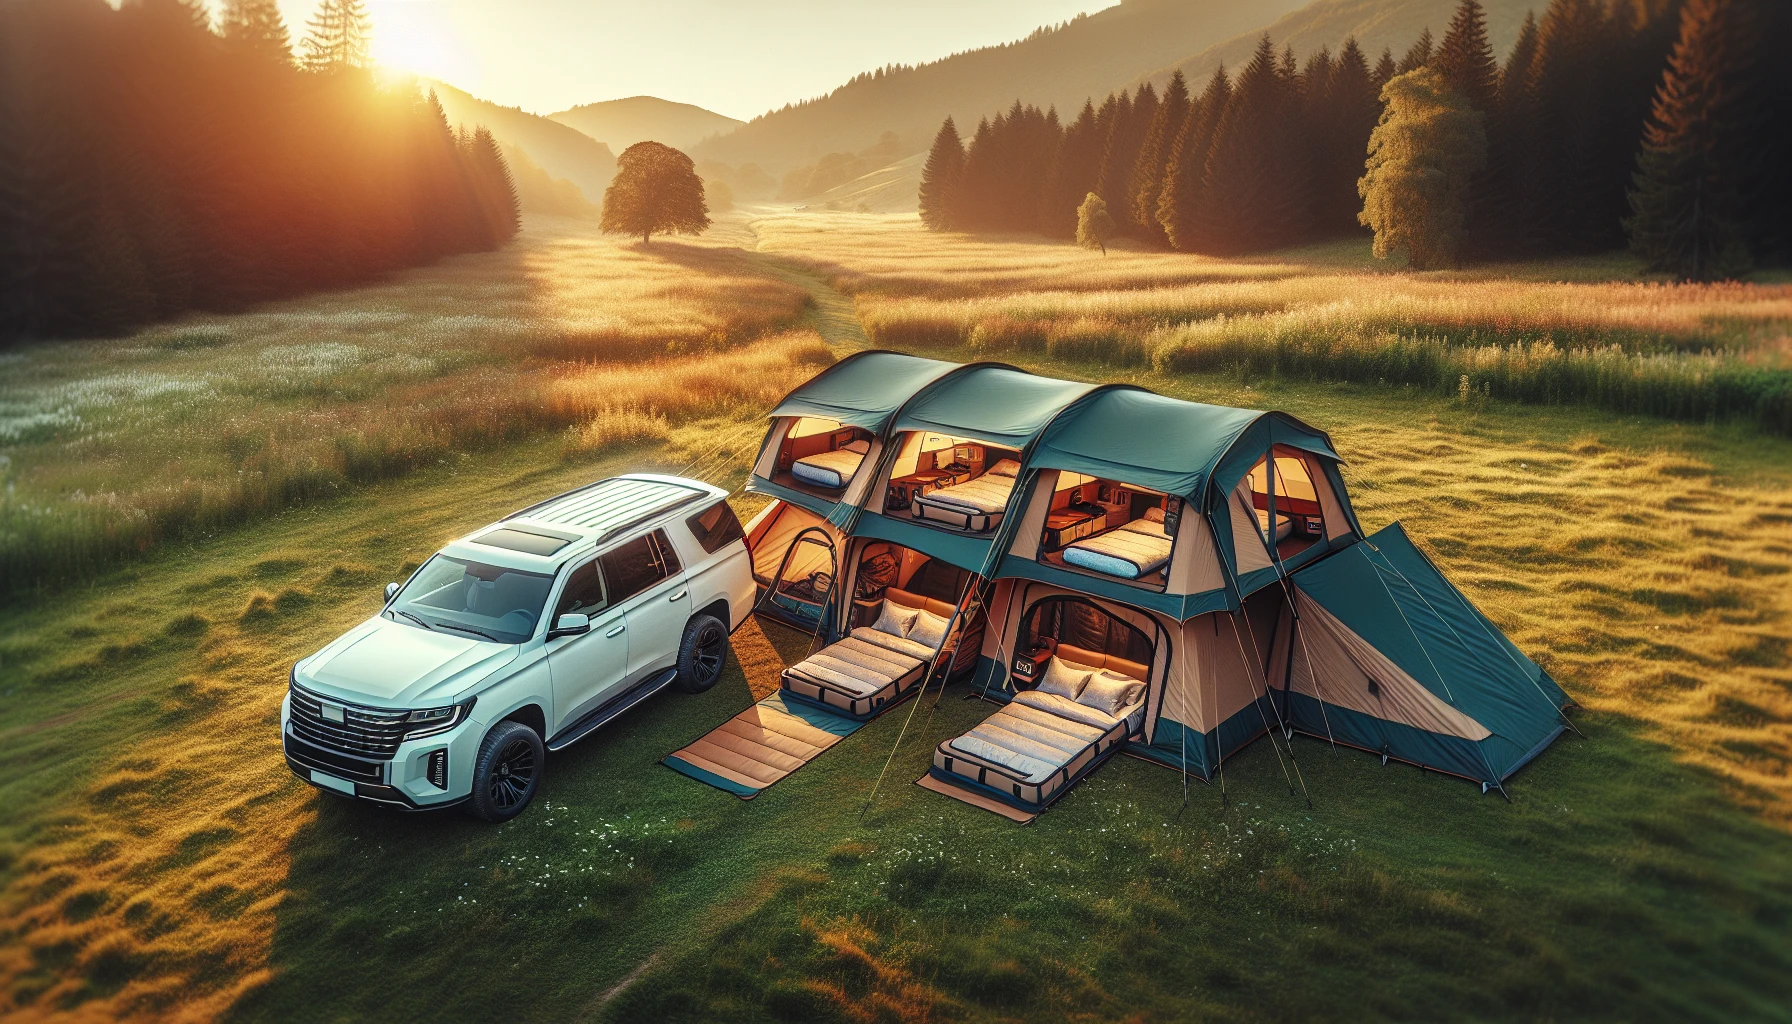 Spacious SUV tent with ample sleeping and storage space